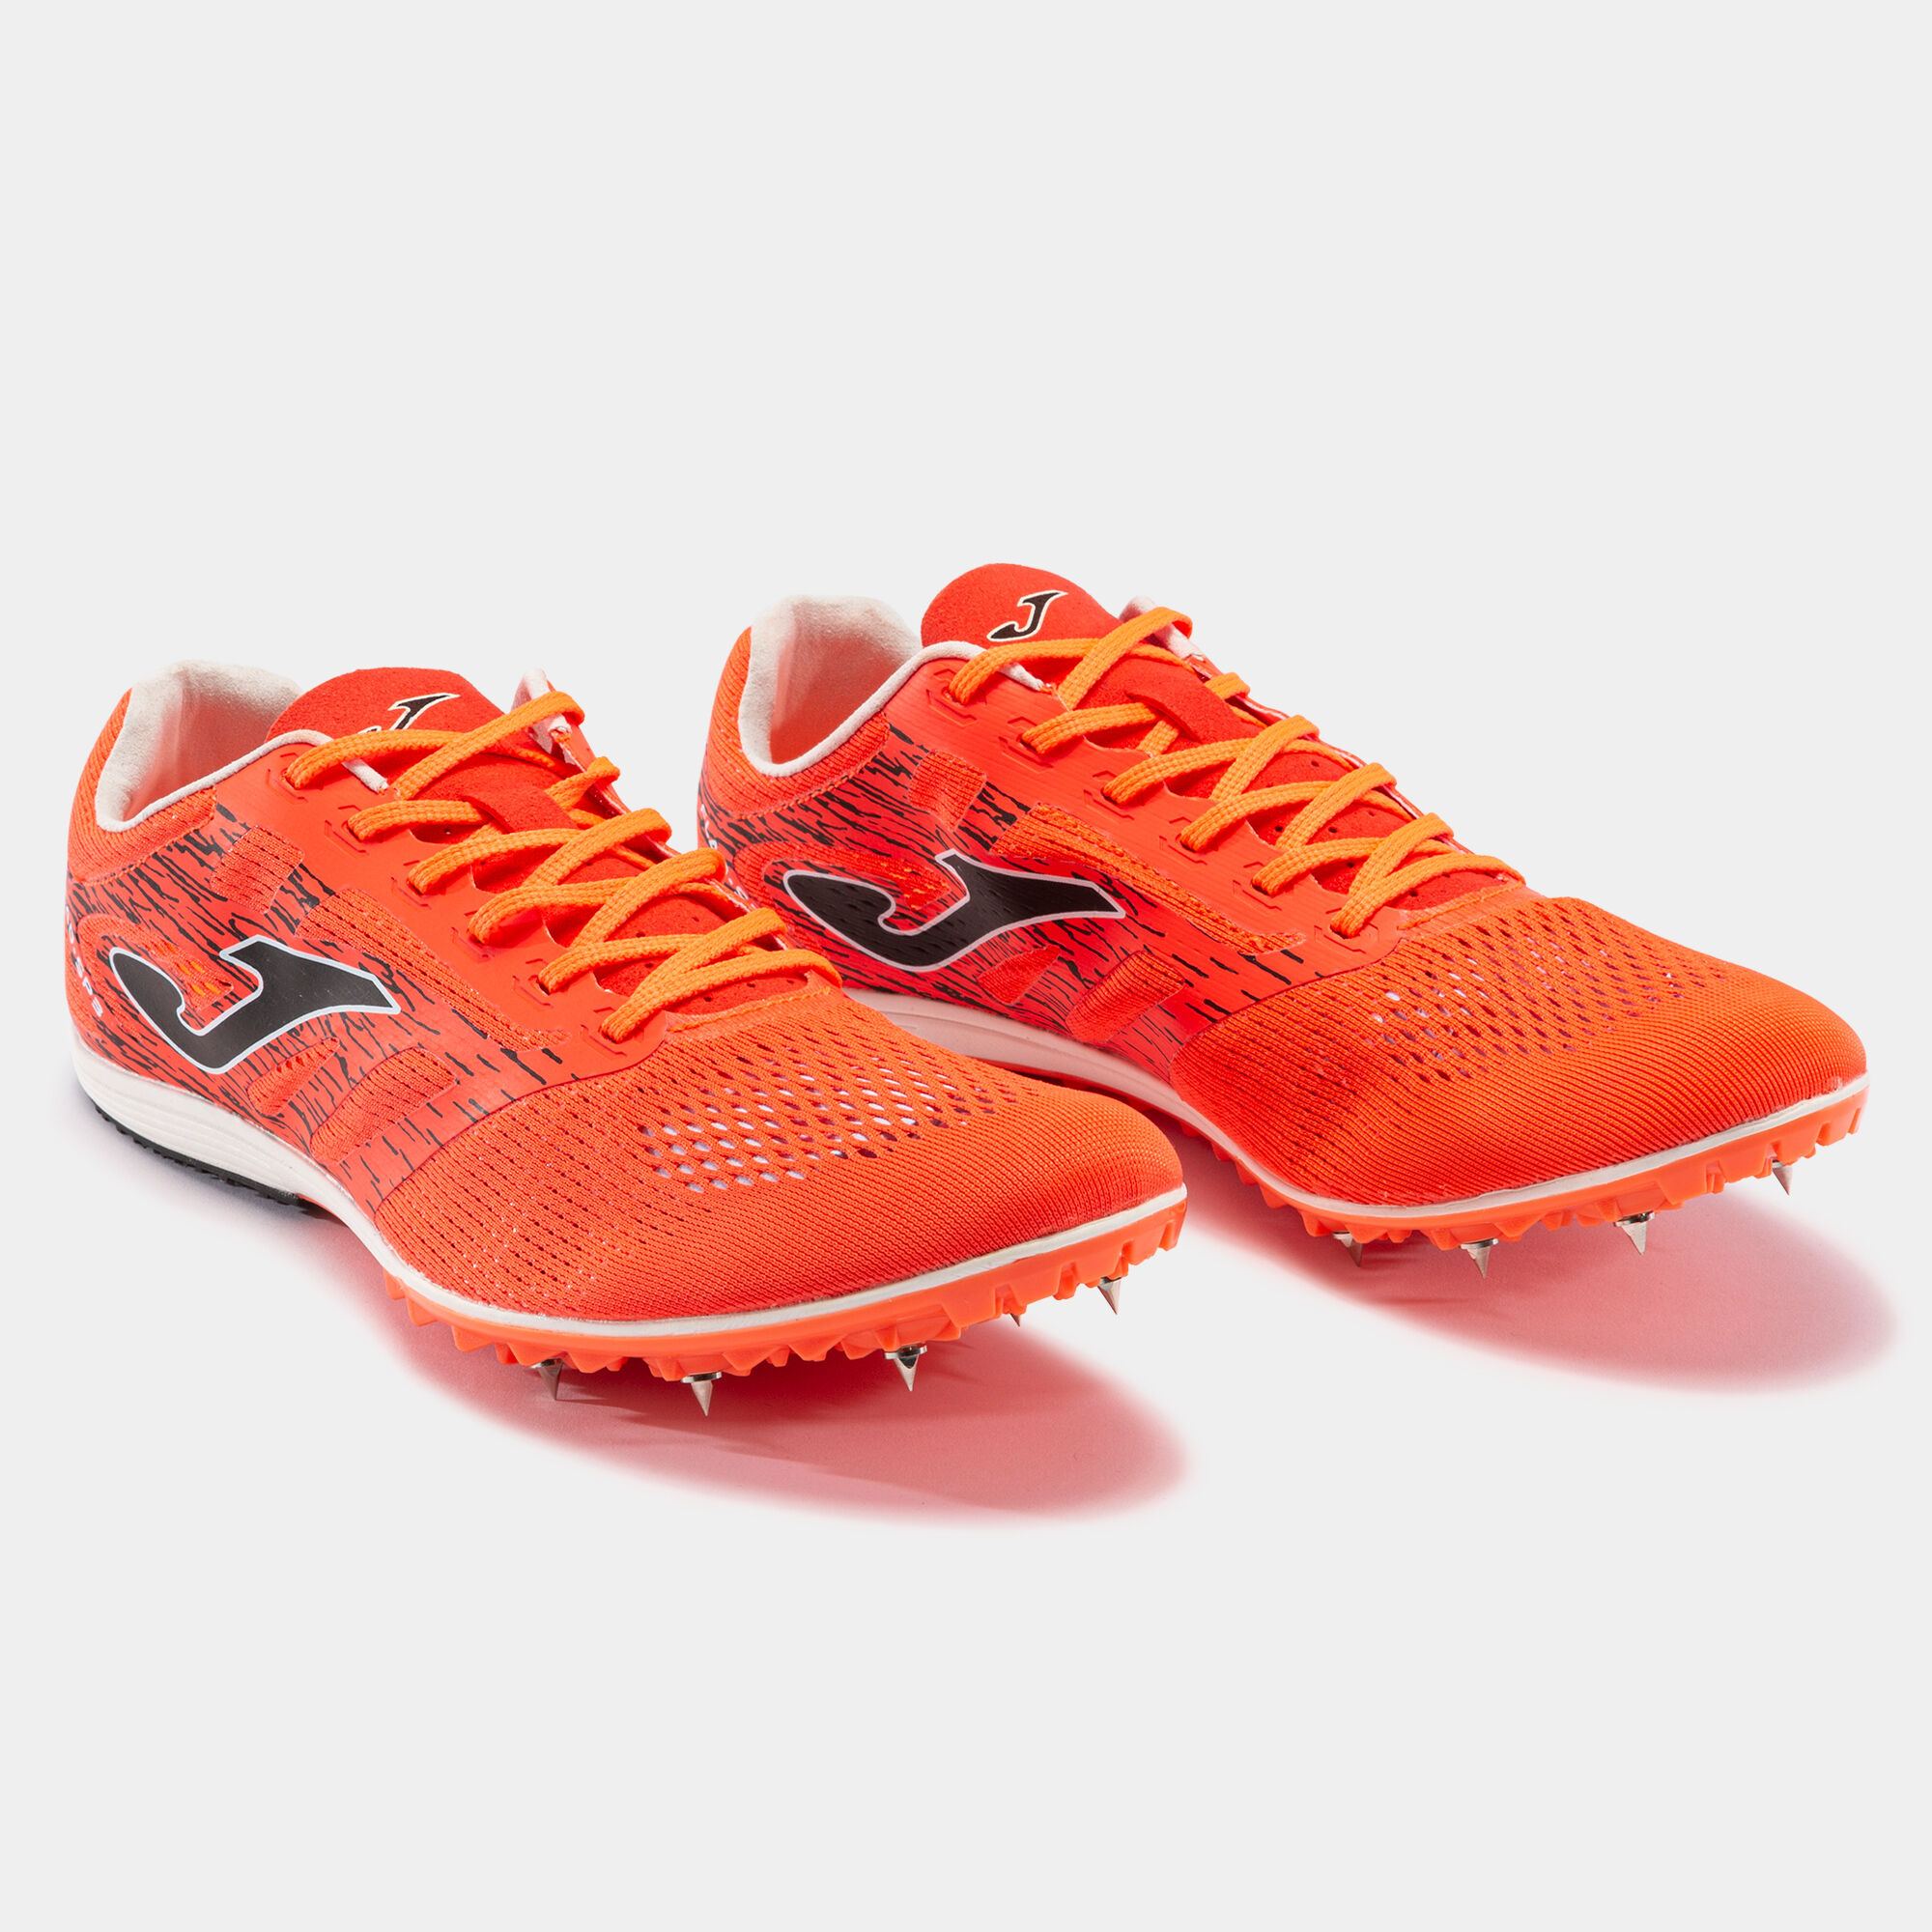 Running shoes Flad 21 claves man coral